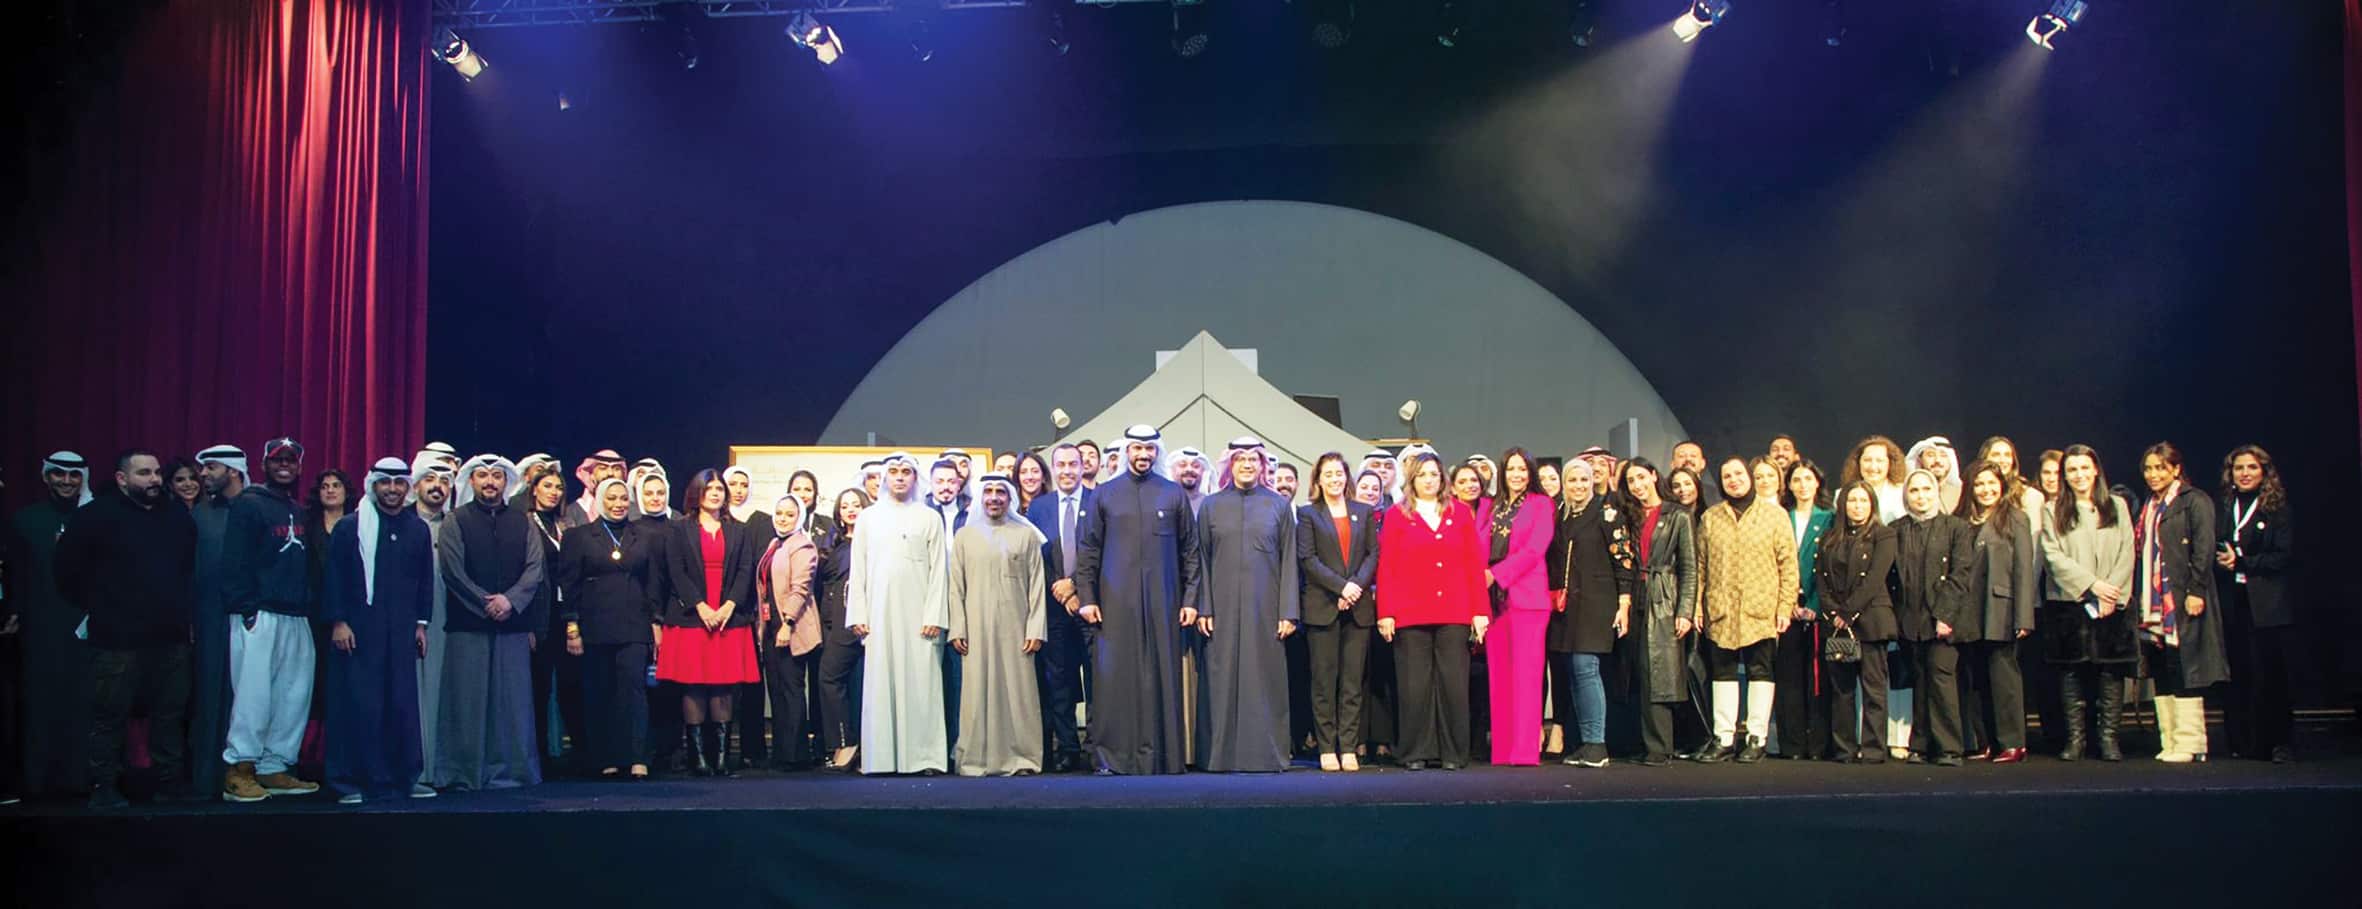 A group photo of Gulf Bank’s employees during the draw.